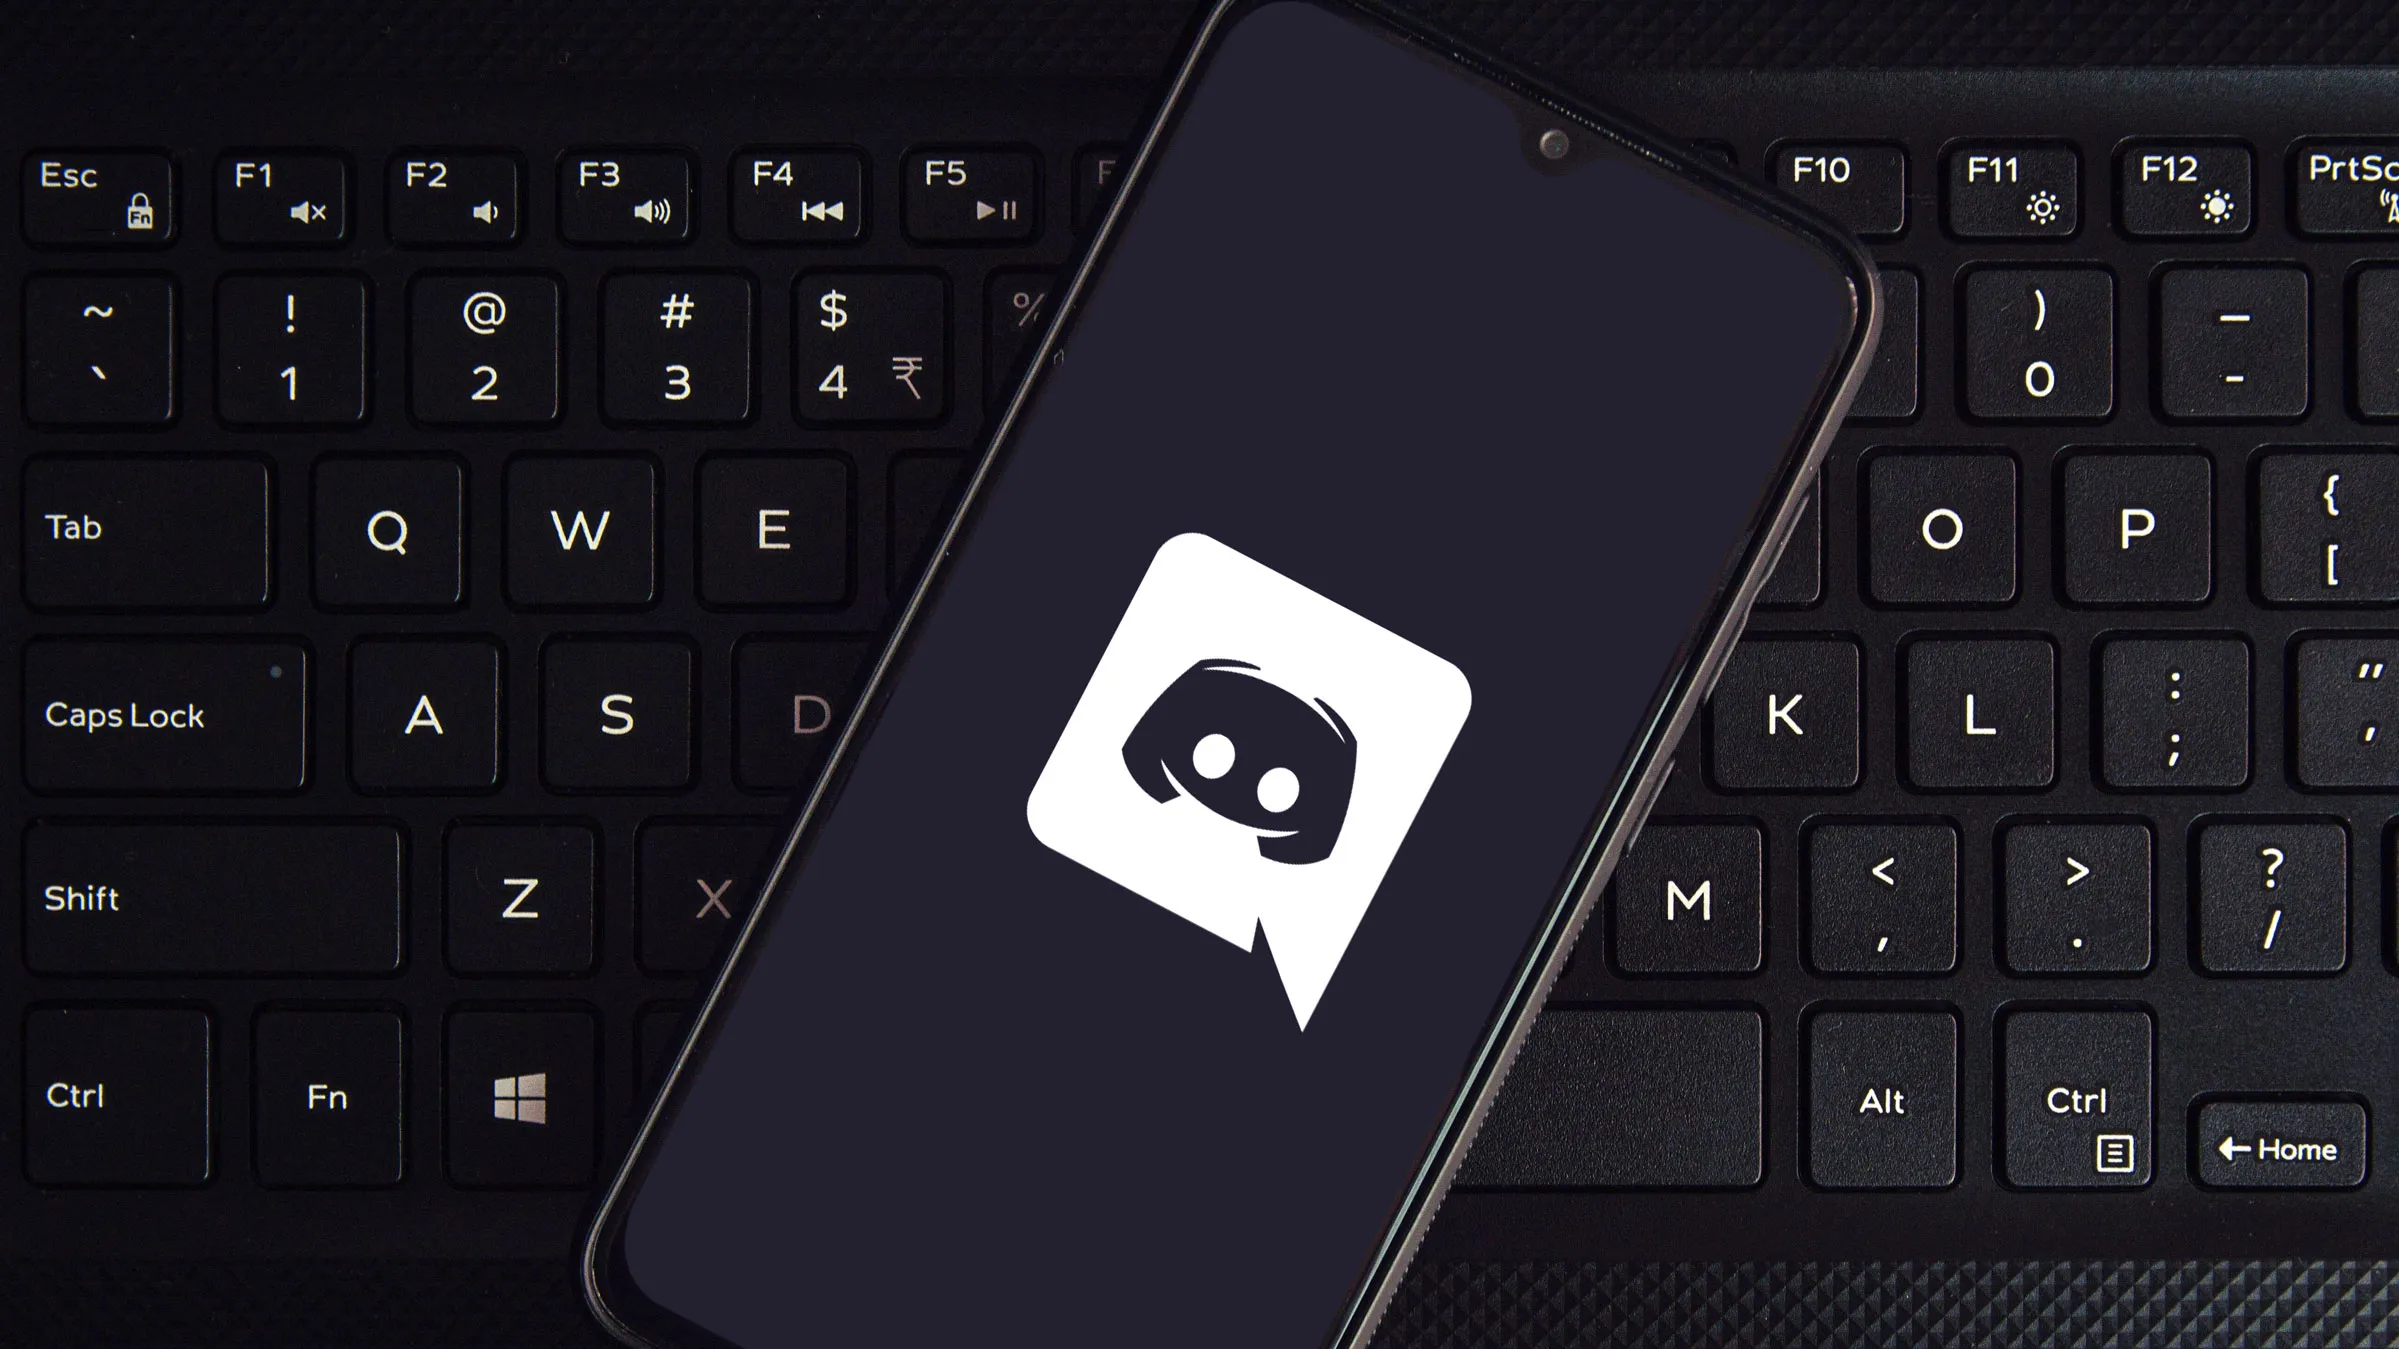 Smartphone lying on a computer keyboard, displaying the Discord app logo on its screen, symbolizing the integration of Discord's communication platform with everyday technology.